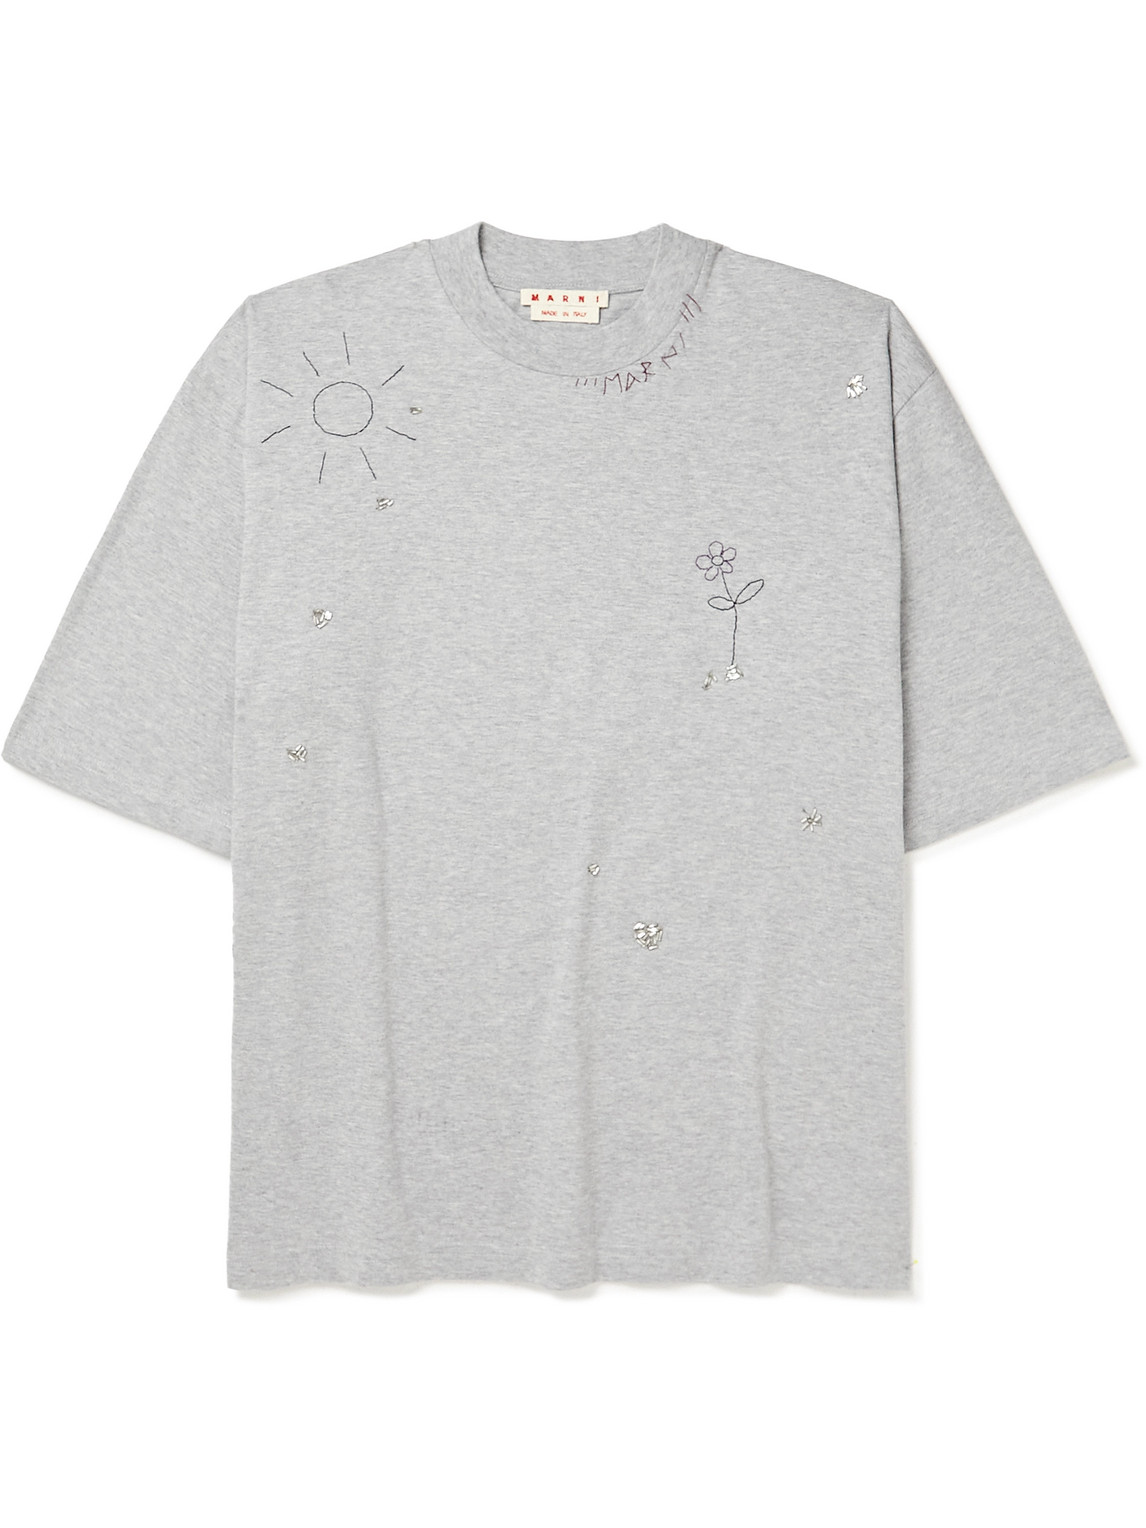 Marni Bead-Embellished Embroidered Cotton-Jersey T-Shirt